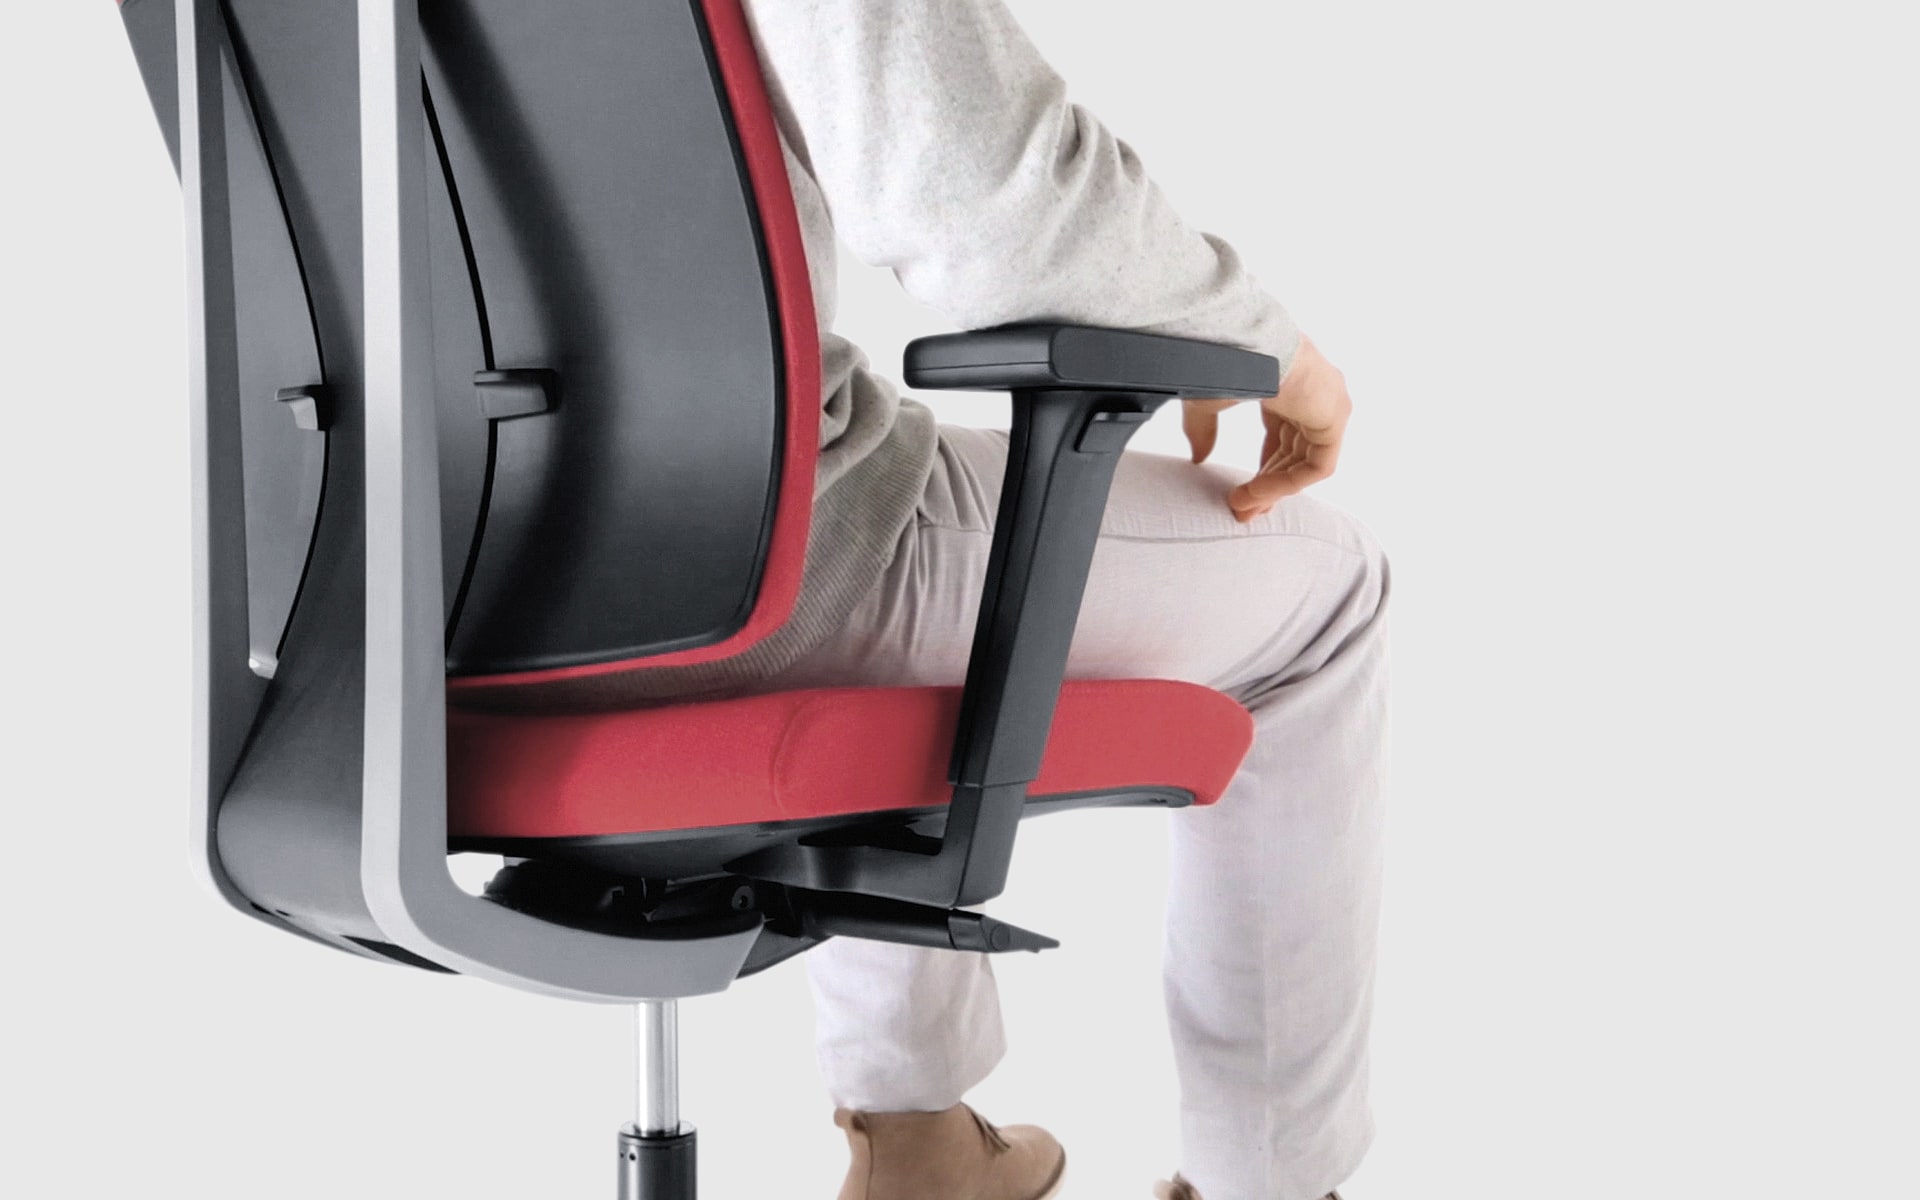 Person sits on Profim Xenon office chair by ITO Design with red upholstery